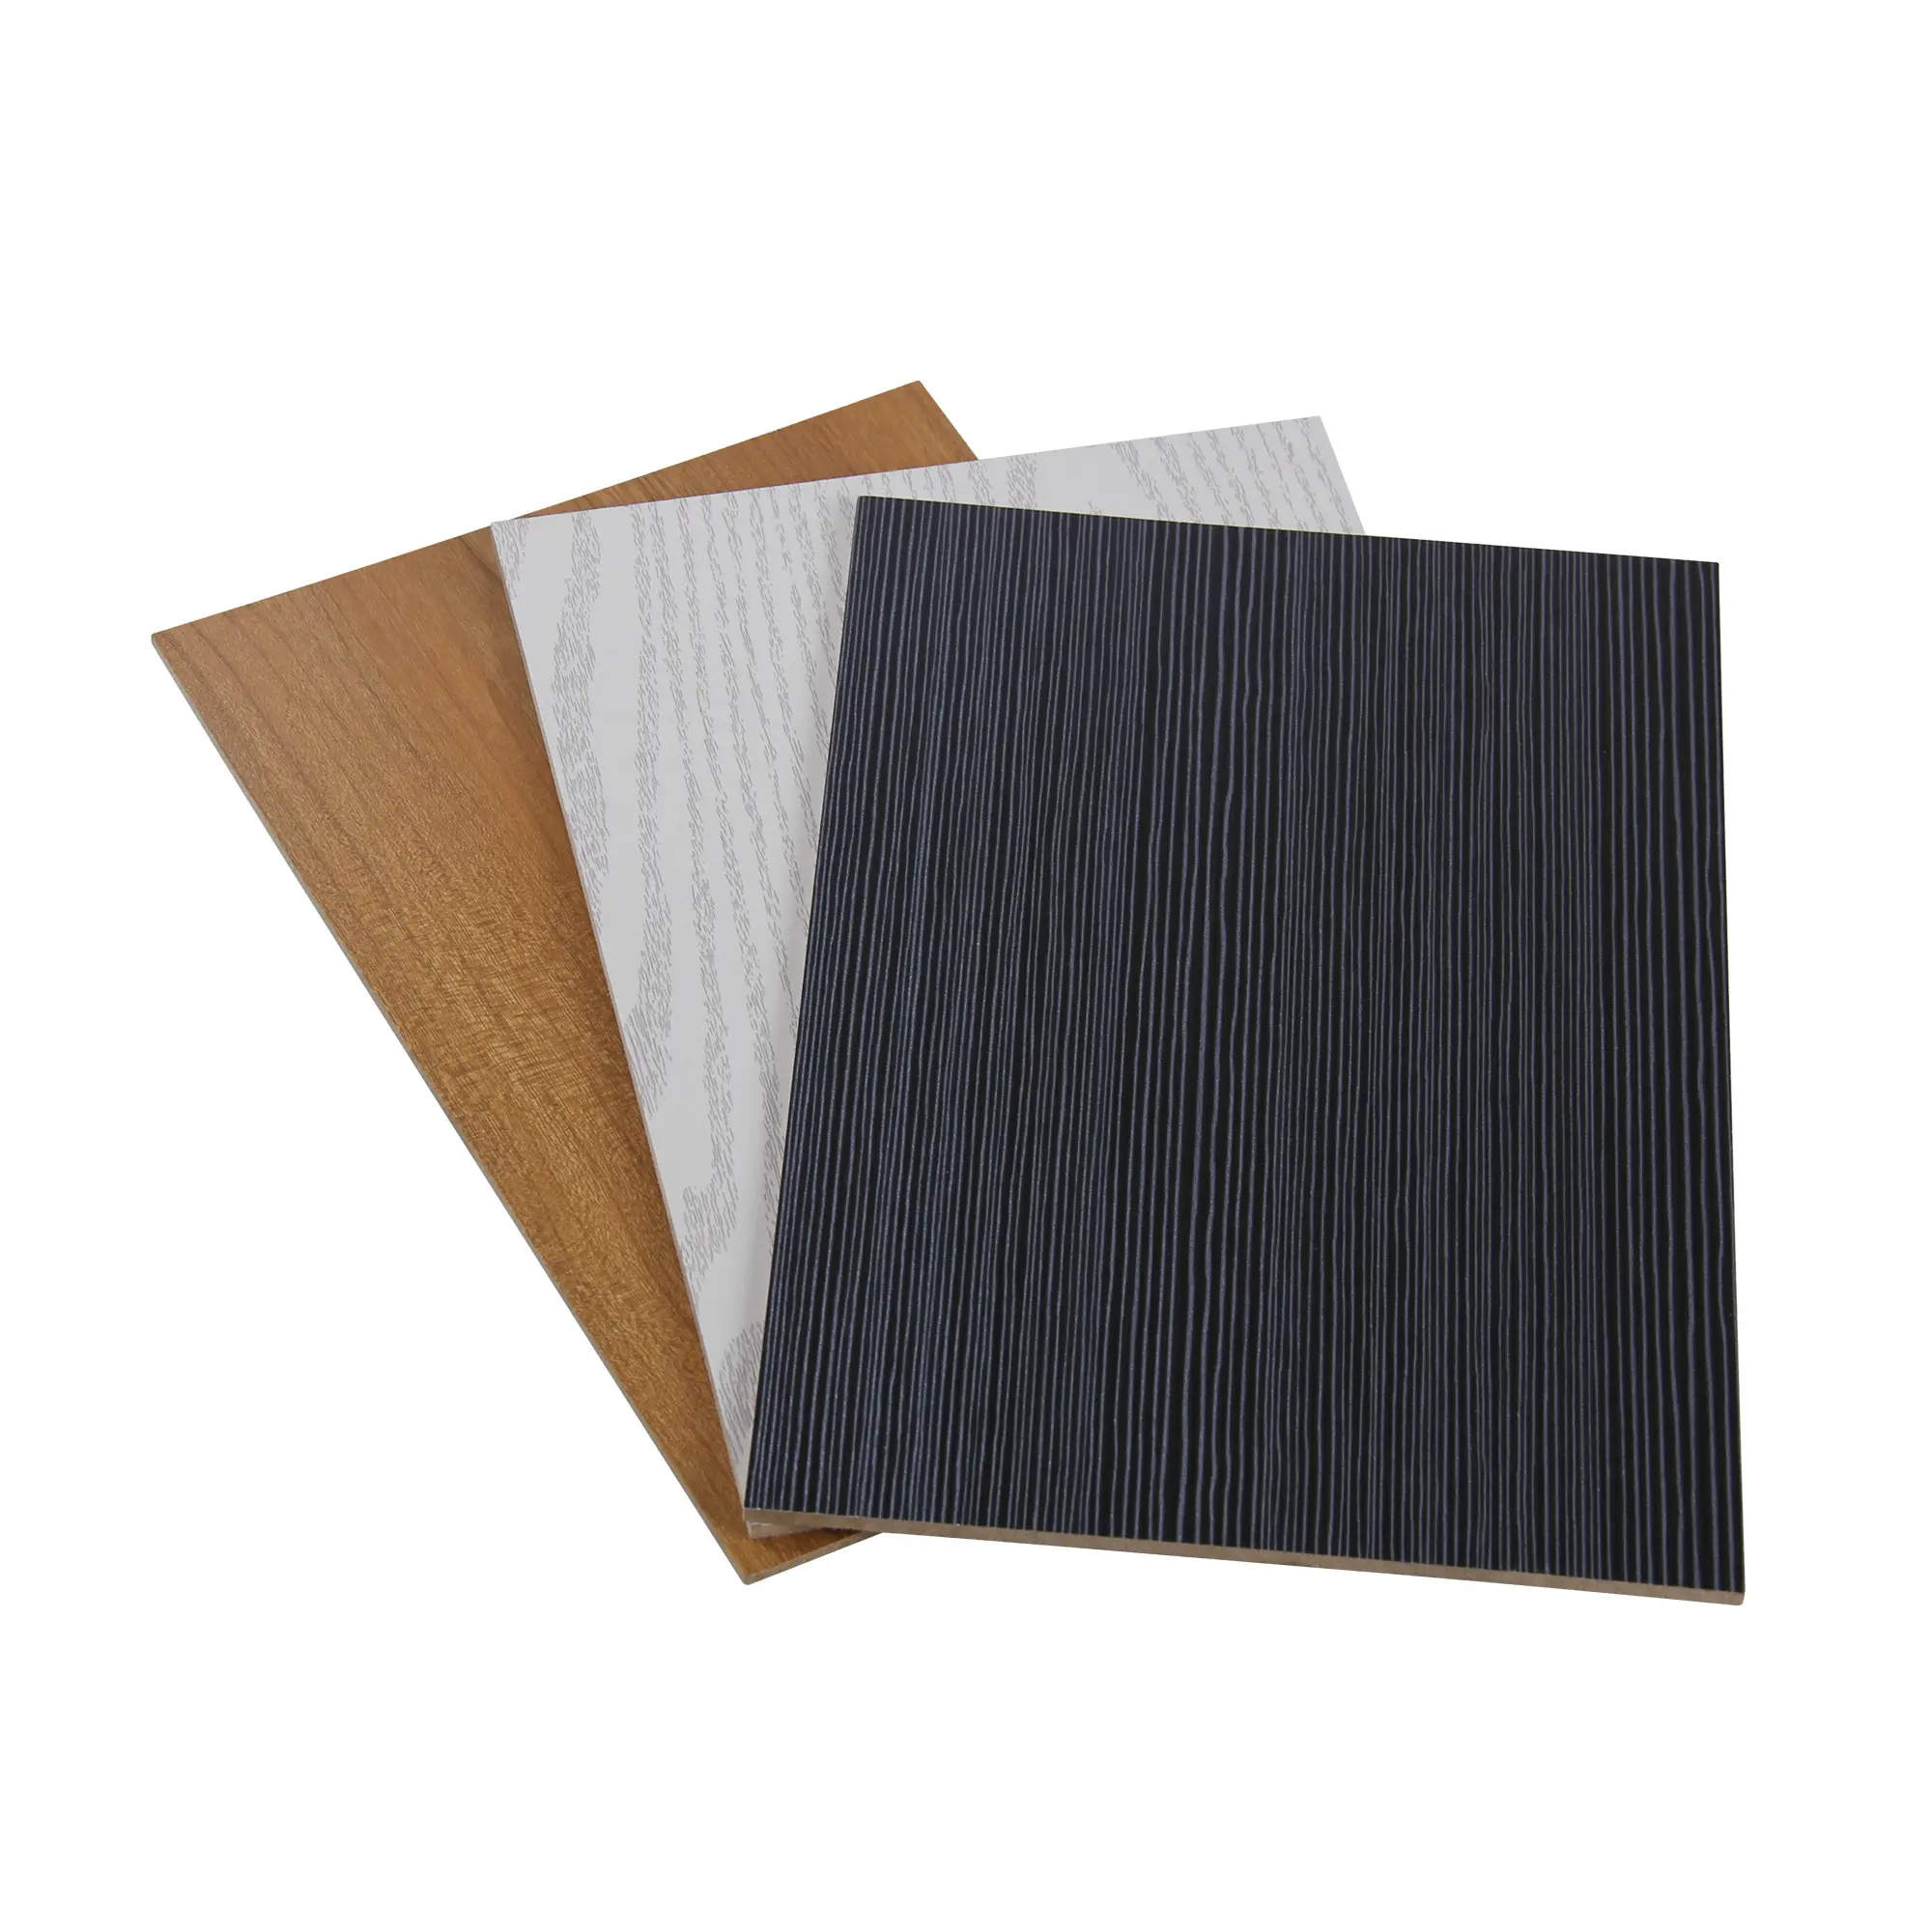 Melamine Particle Board 2022 New Arrival 4'x8' Melamine Board Sheet Plywood MDF Or Particle Board